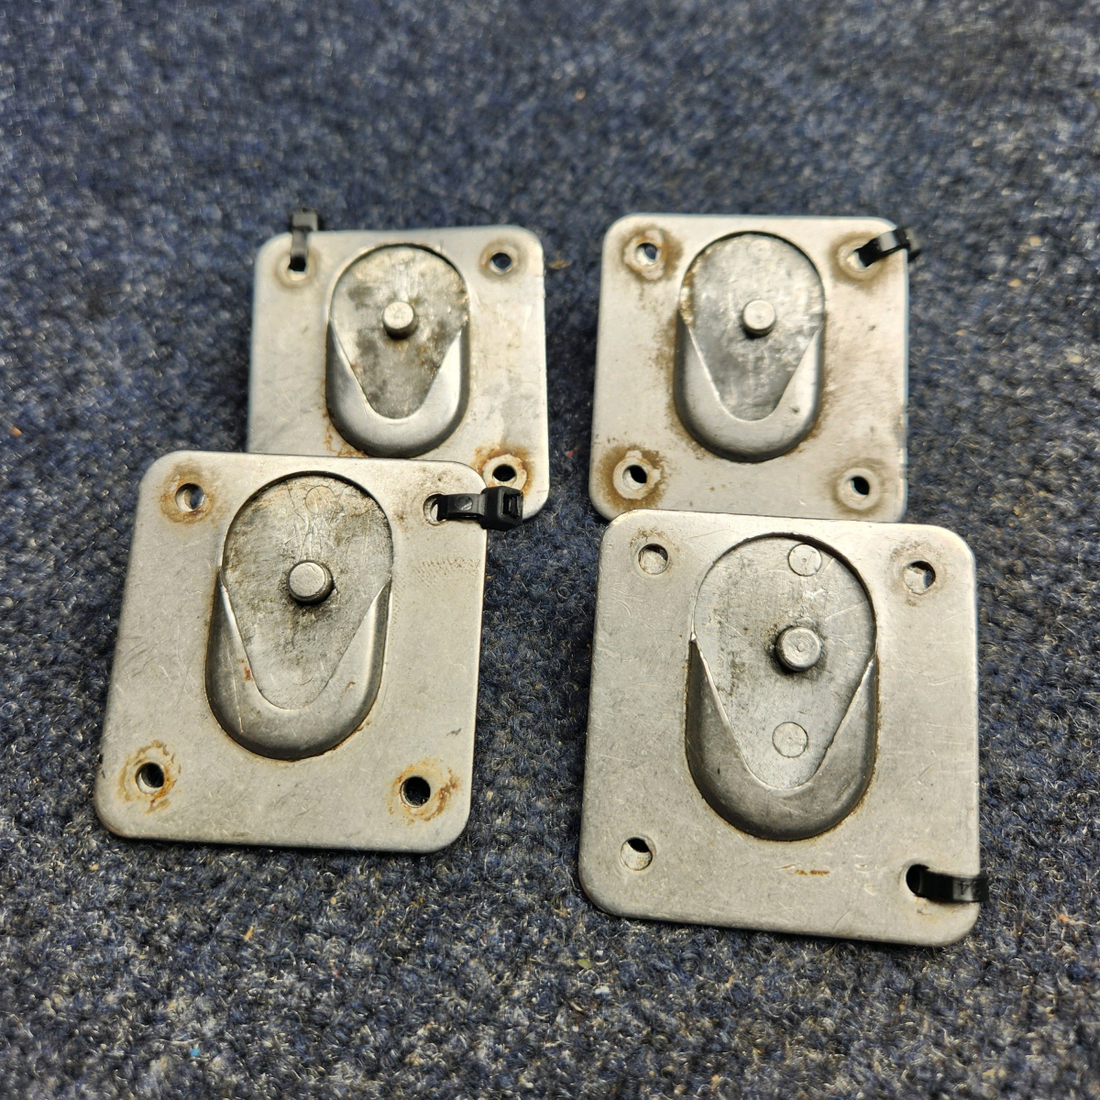 Used aircraft parts for sale, 79781-002 Piper PA32RT-300 AFT SEAT ATTACH PLATE "PRICE PER EACH"